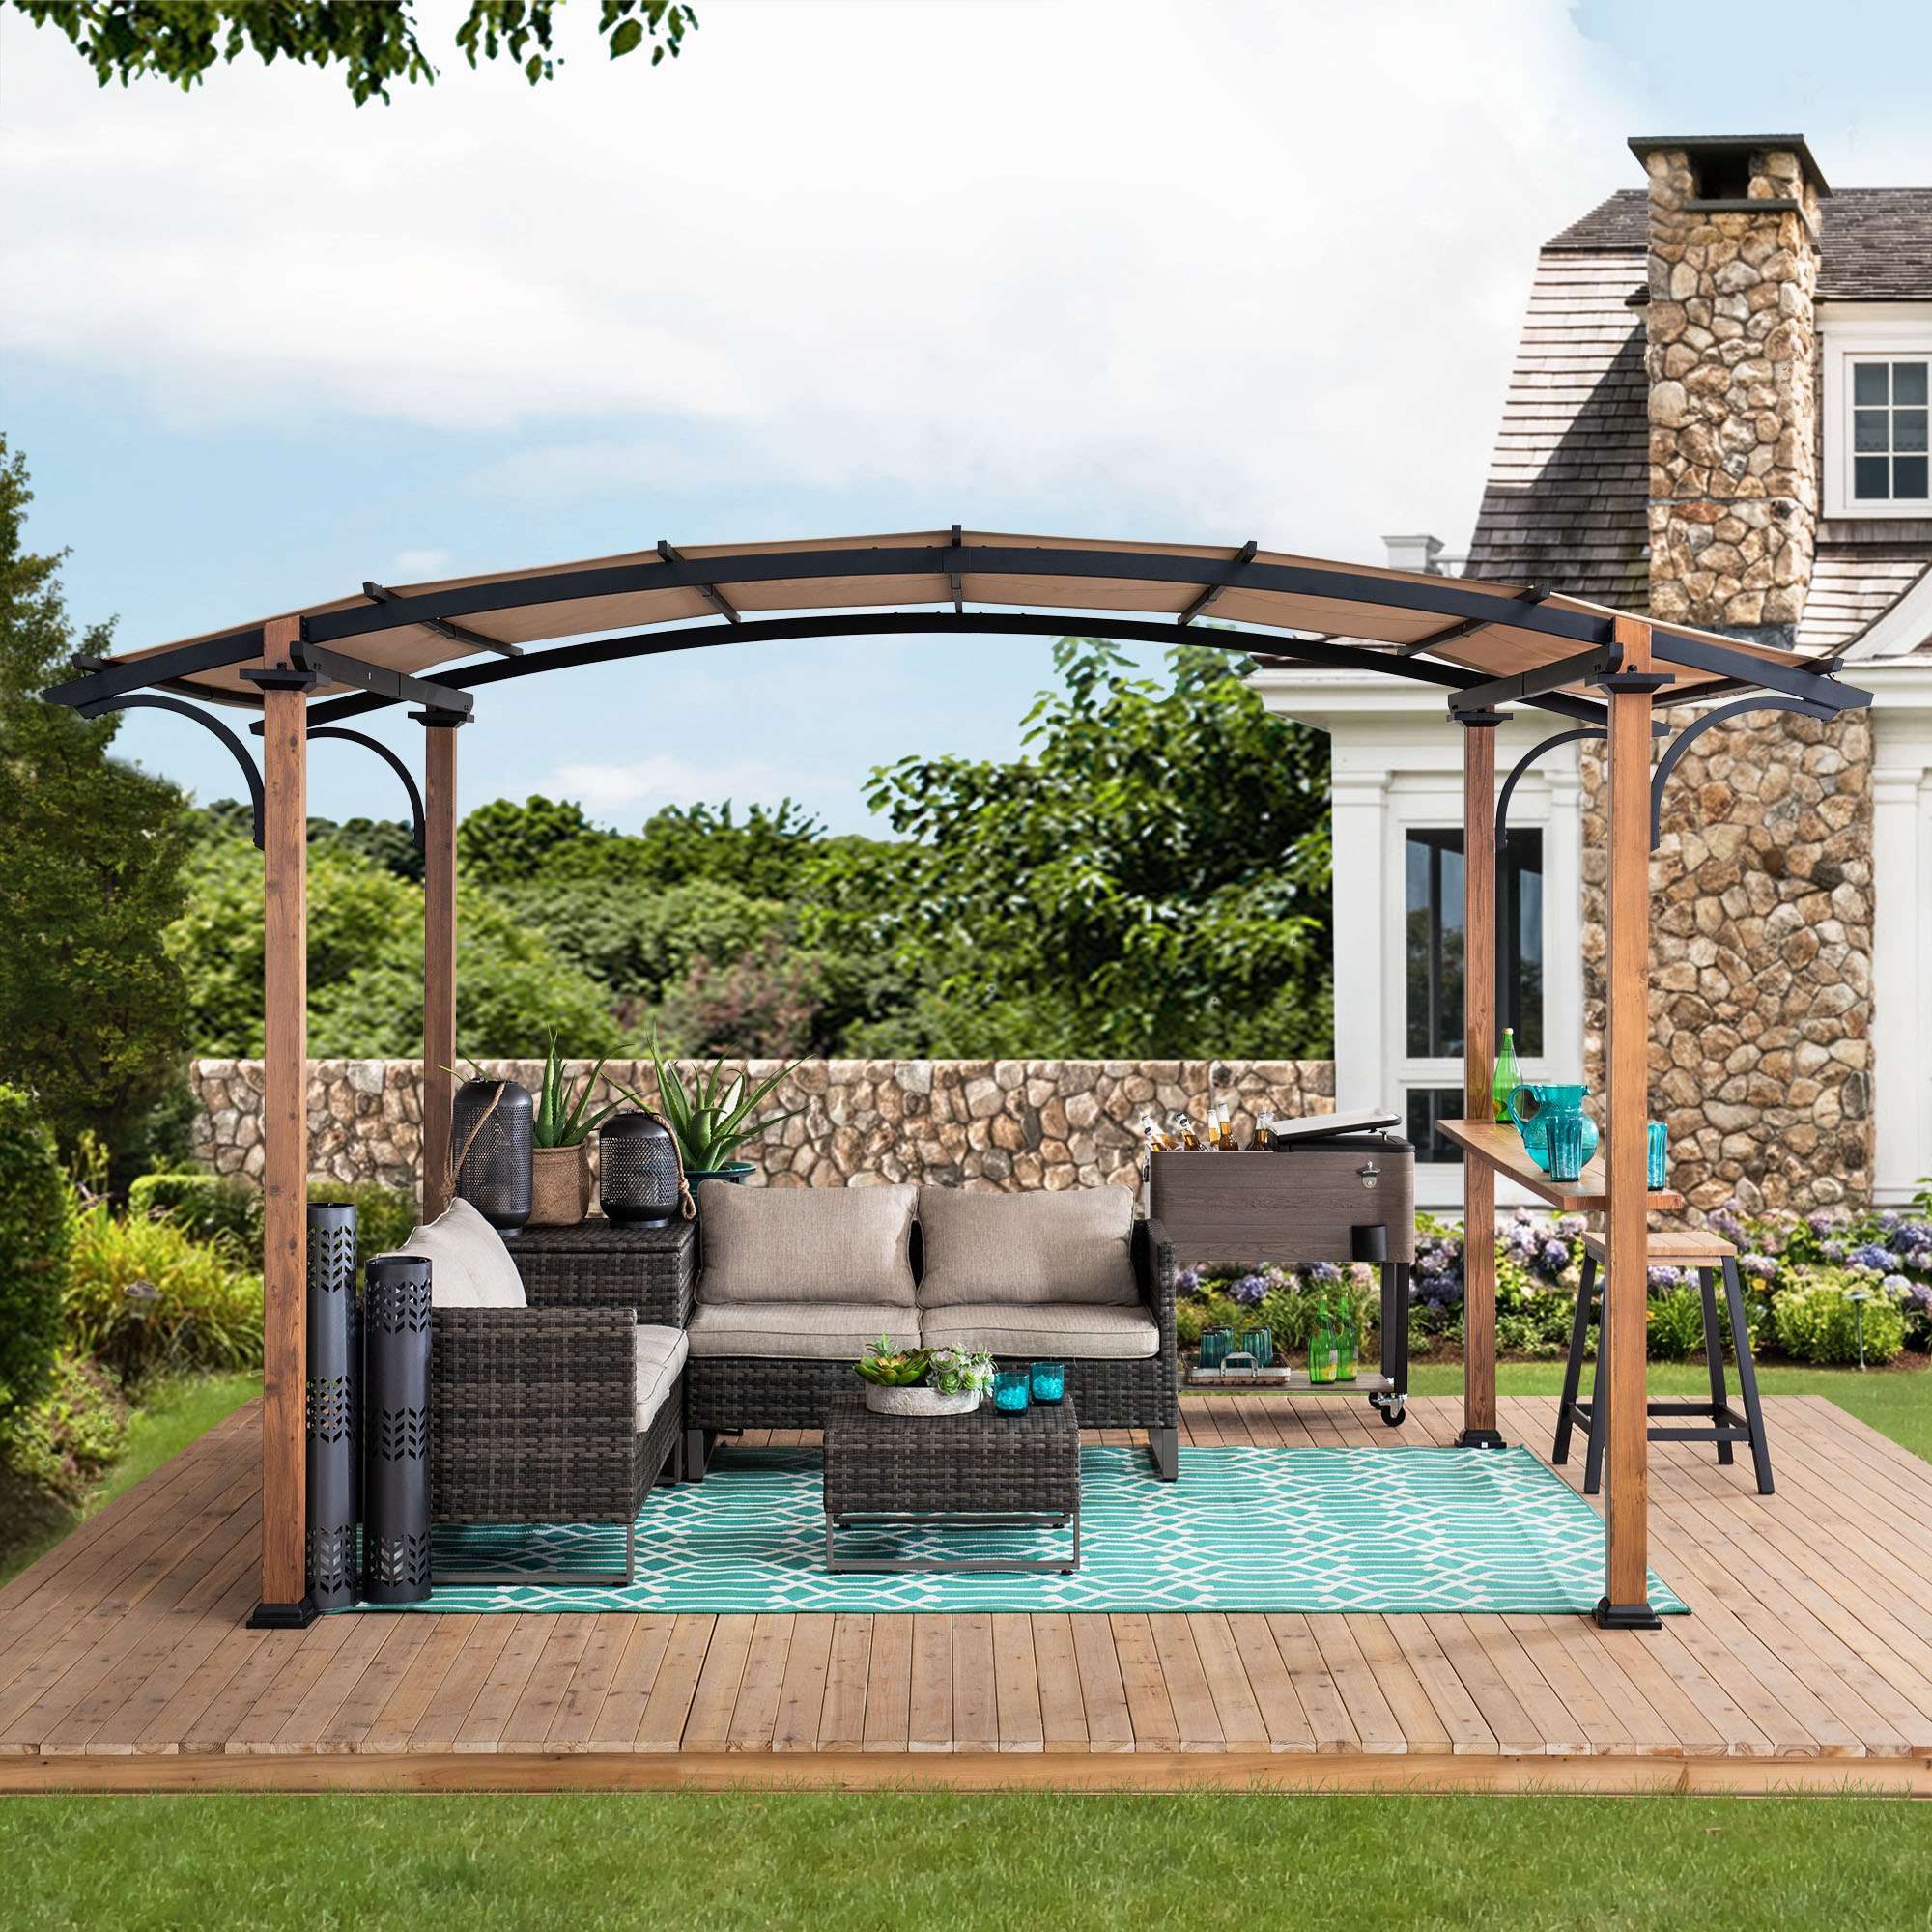 Sunjoy Beechhurst 10 ft. x 7.75 ft. Steel Arched Pergola with Natural Wood Looking Finish and Tan Shade